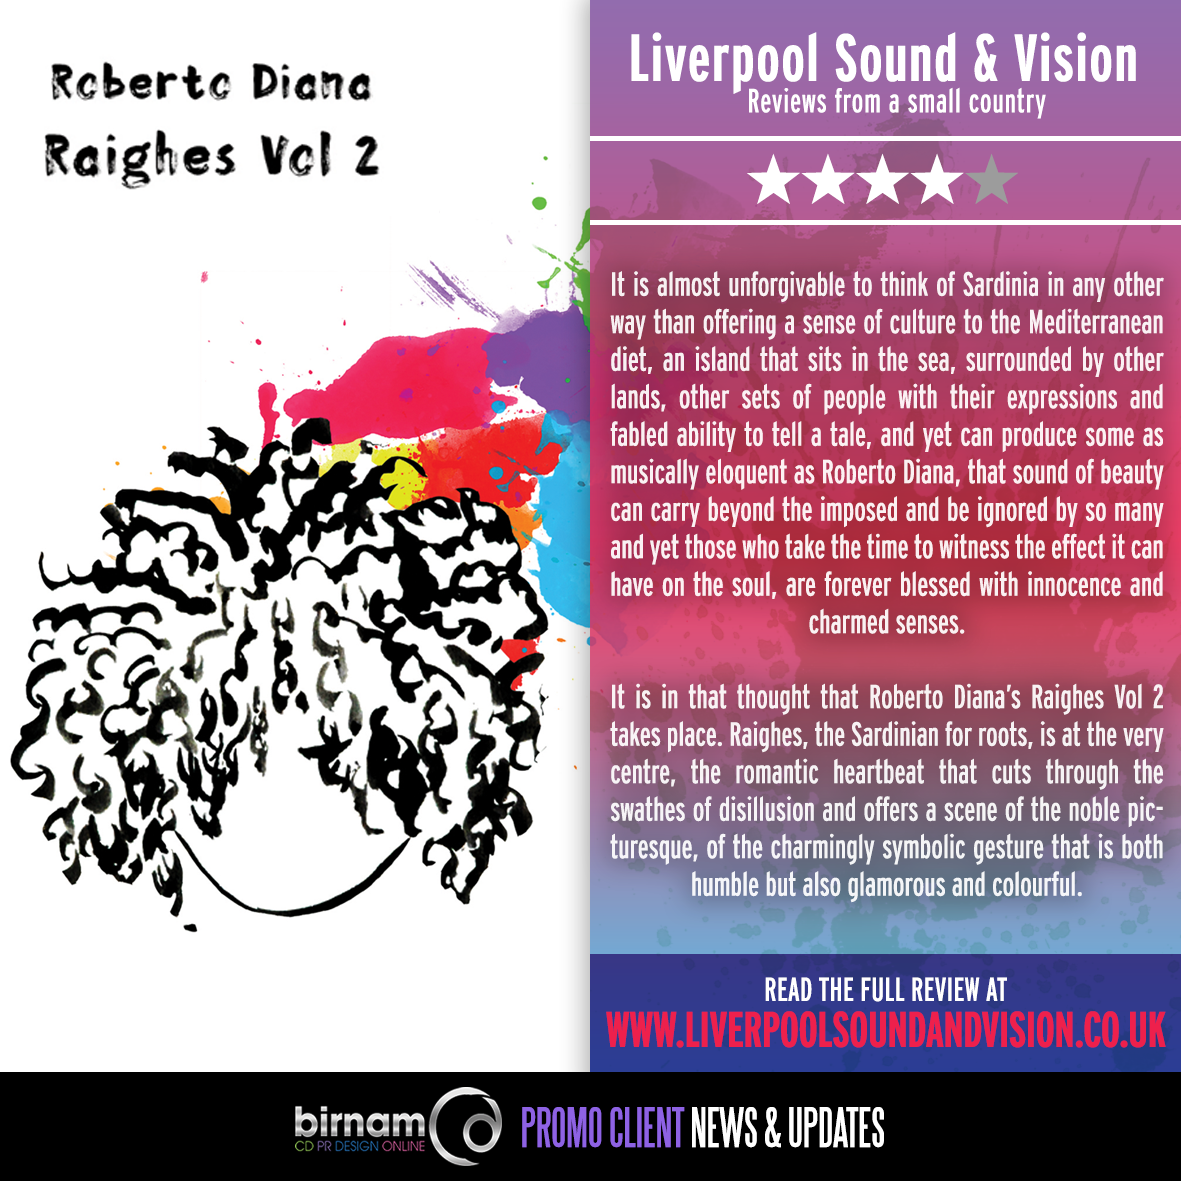 Raighes Vol 2 by Roberto diana 4 stelle su liverpool sound and vision